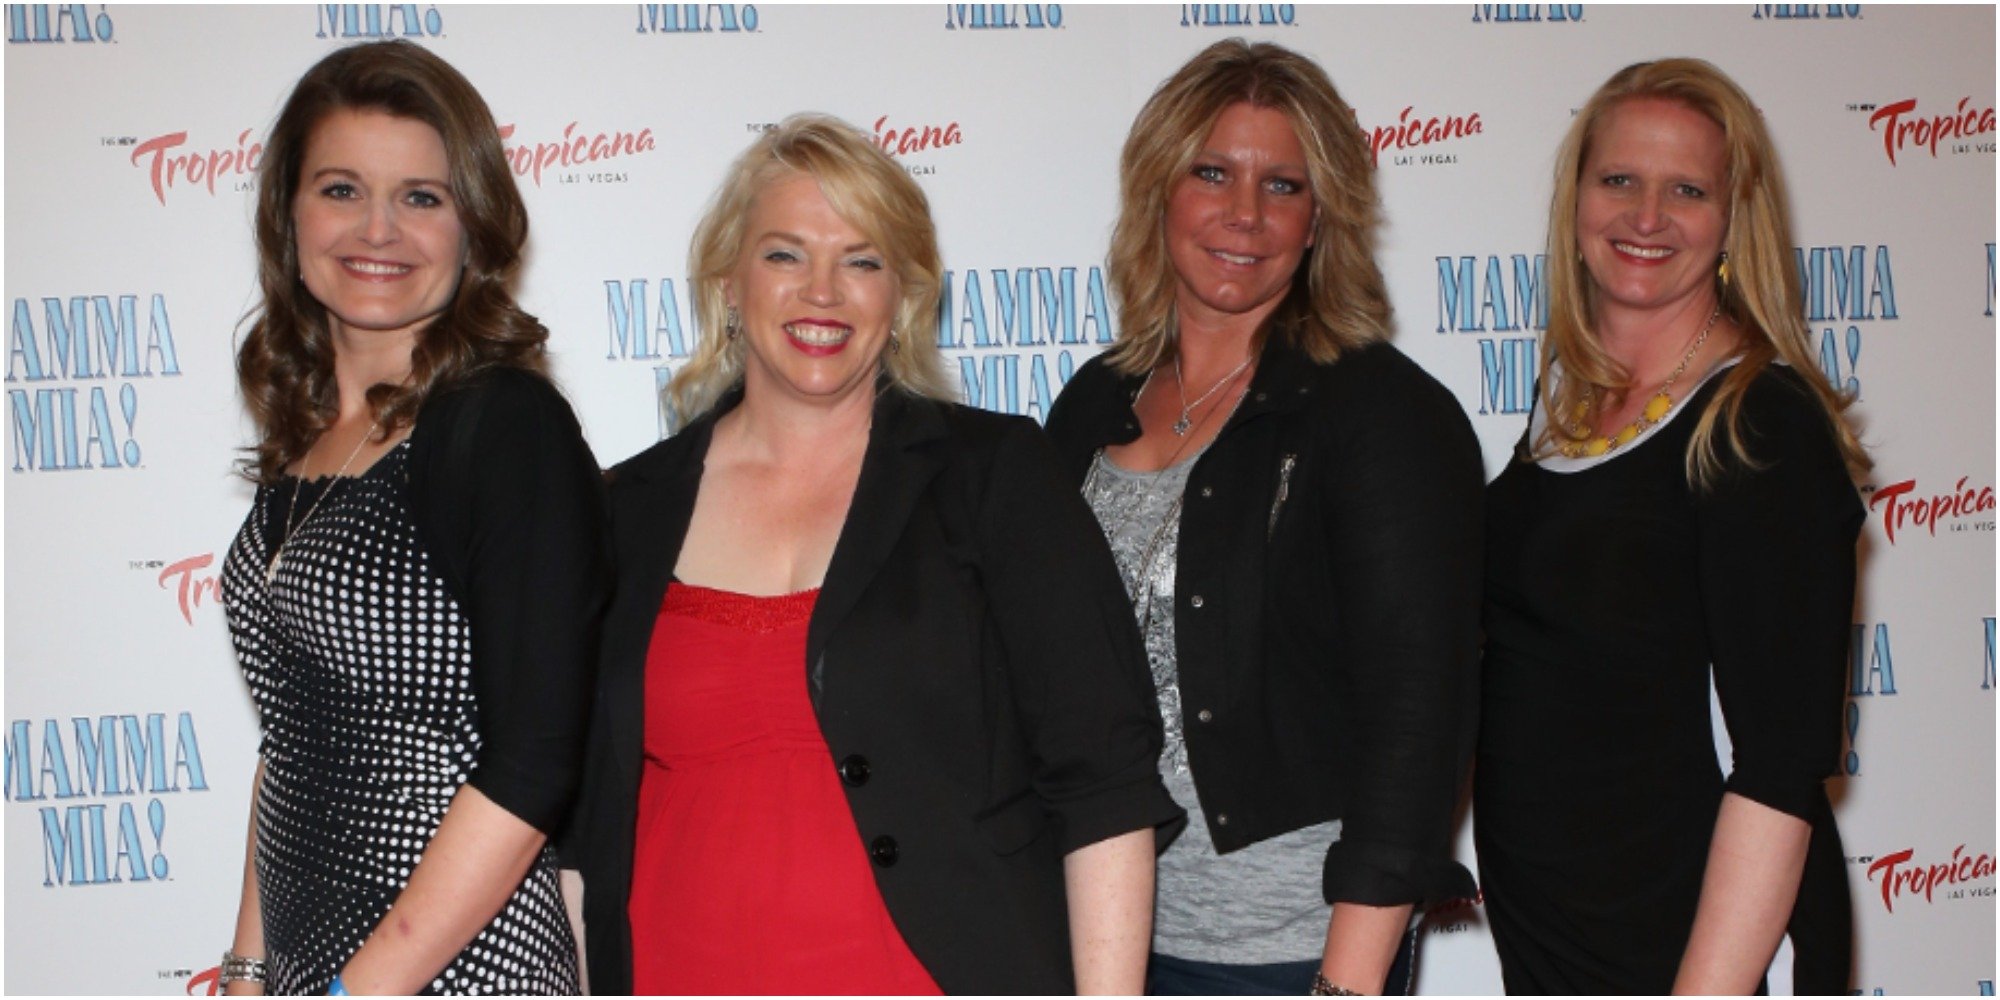 Robyn Brown, Janelle Brown Meri Brown and Christine Brown from "Sister Wives" arrive at the grand opening of the show "Mamma Mia!" at the New Tropicana Las Vegas on May 16, 2014, in Las Vegas, Nevada.